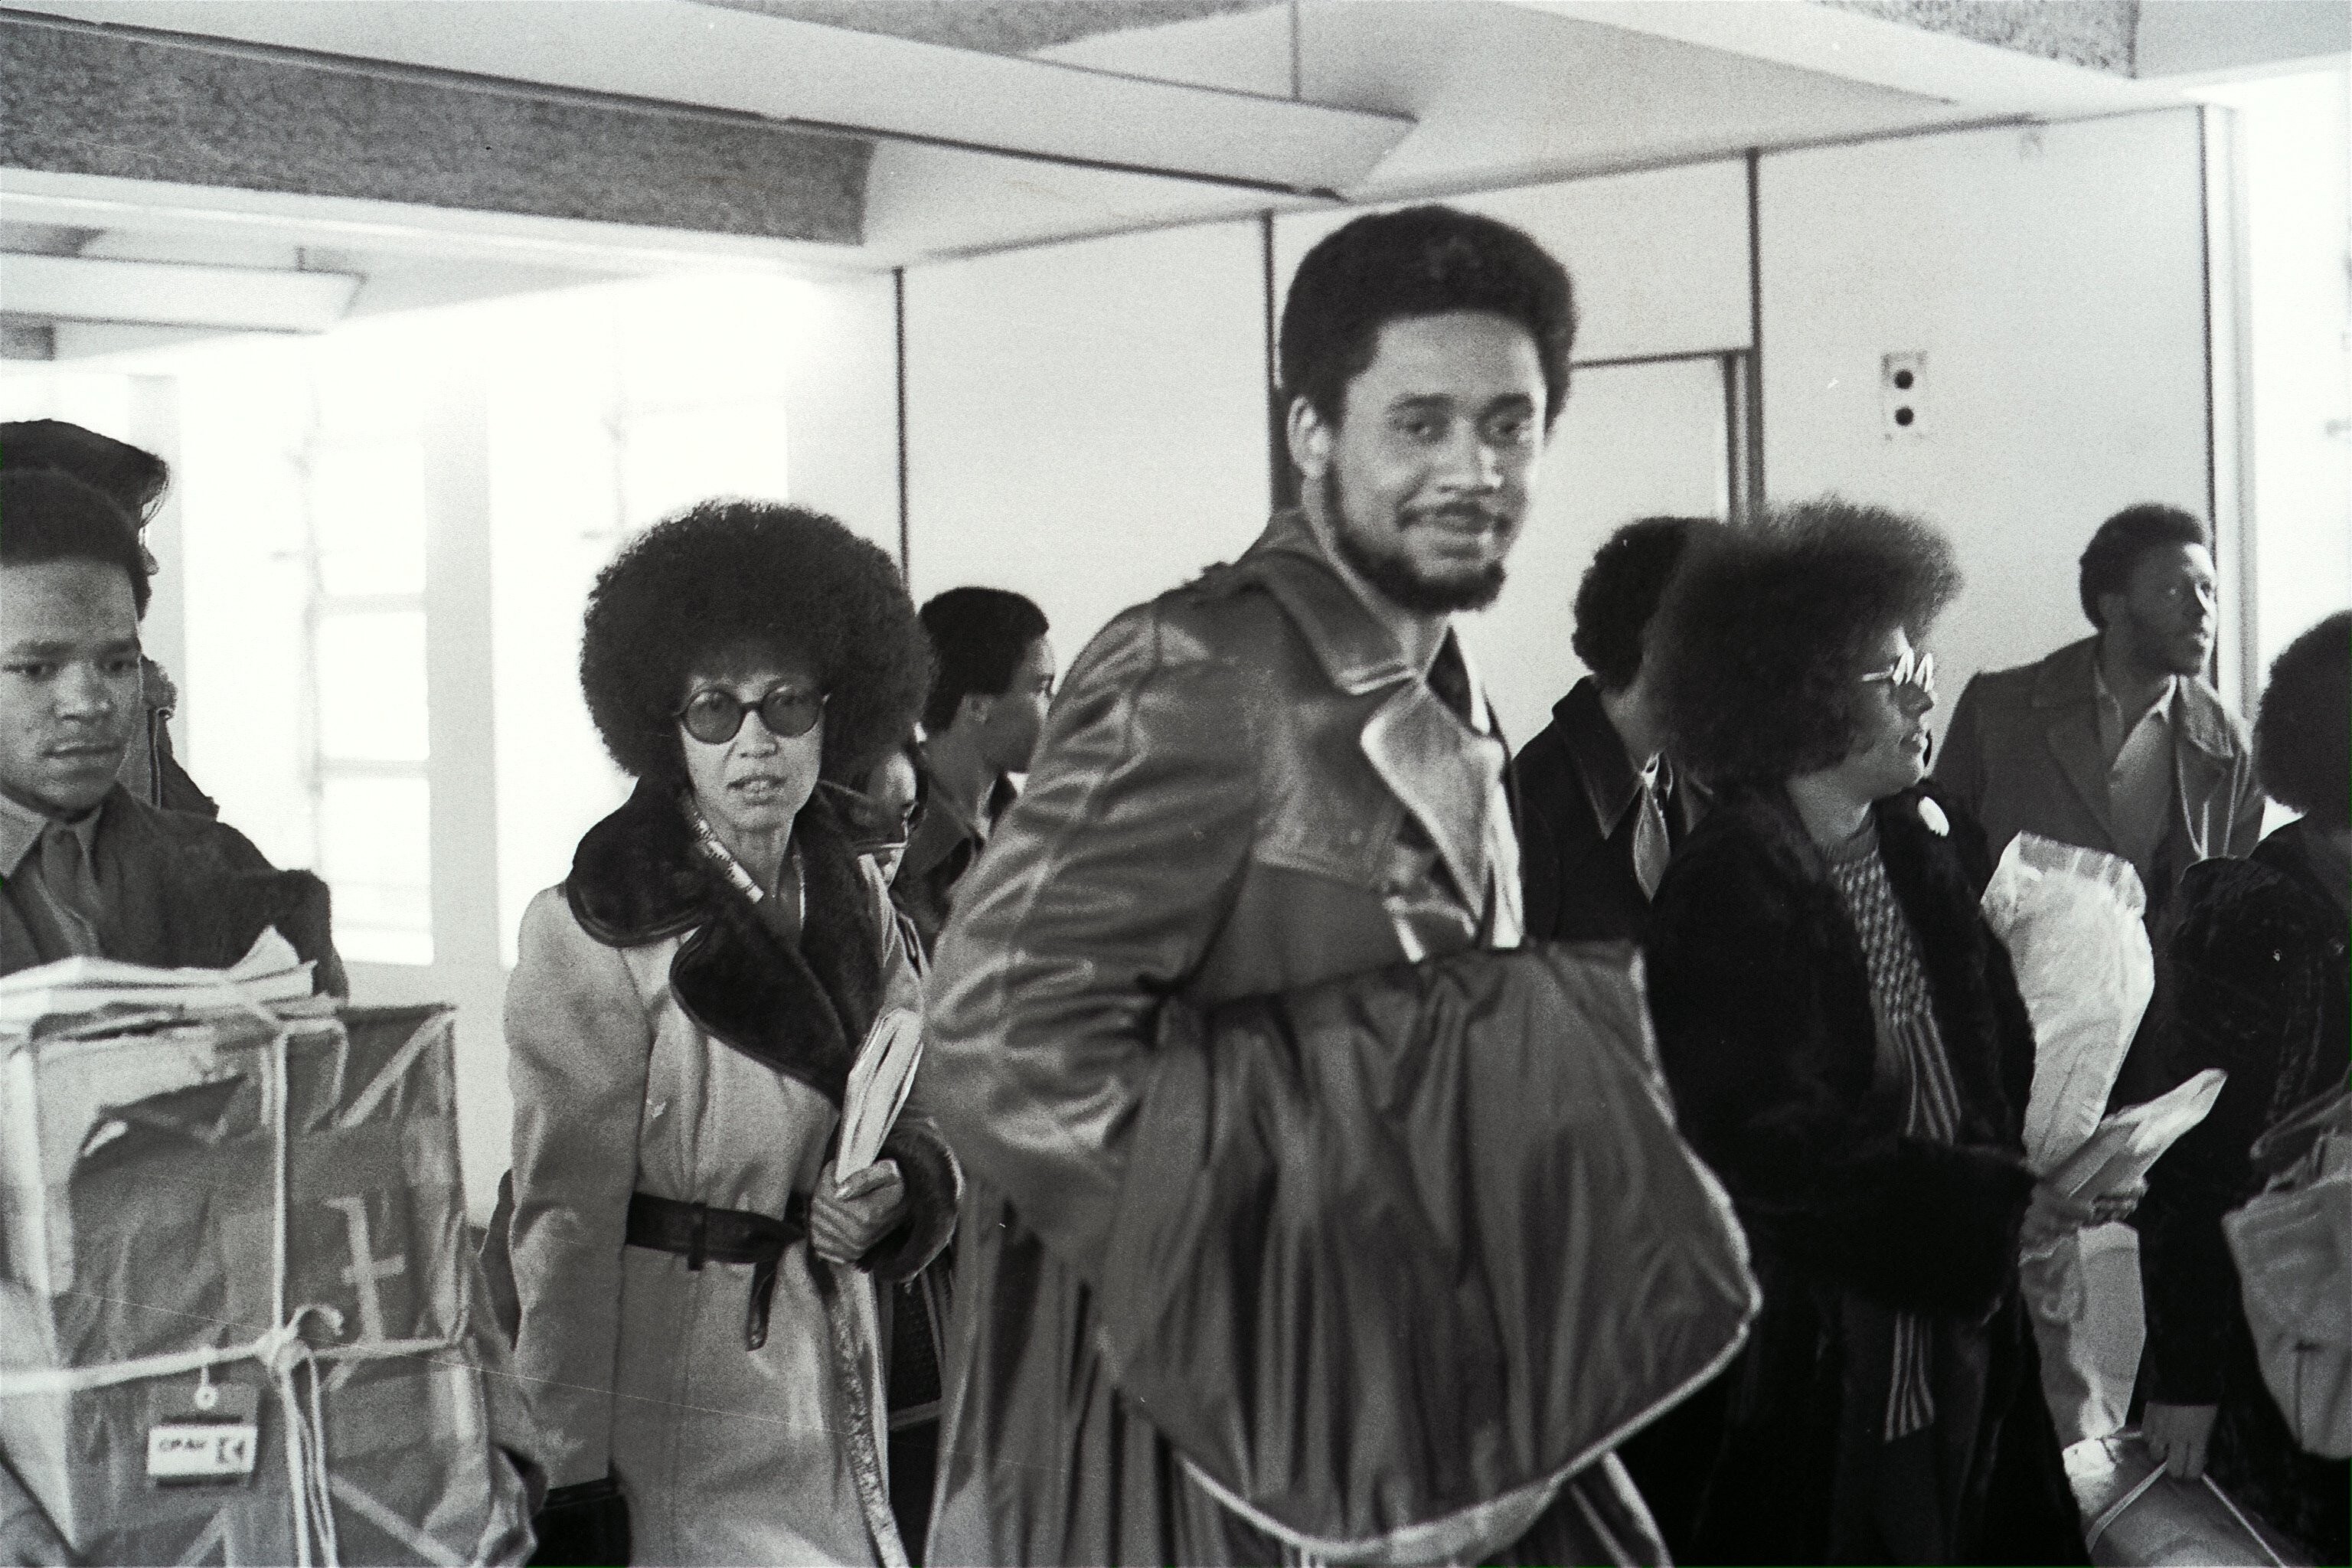 Members of the Black Panther Party arrive at Kai Tak Airport in Hong Kong on their way to mainland China. Photo: SCMP Pictures